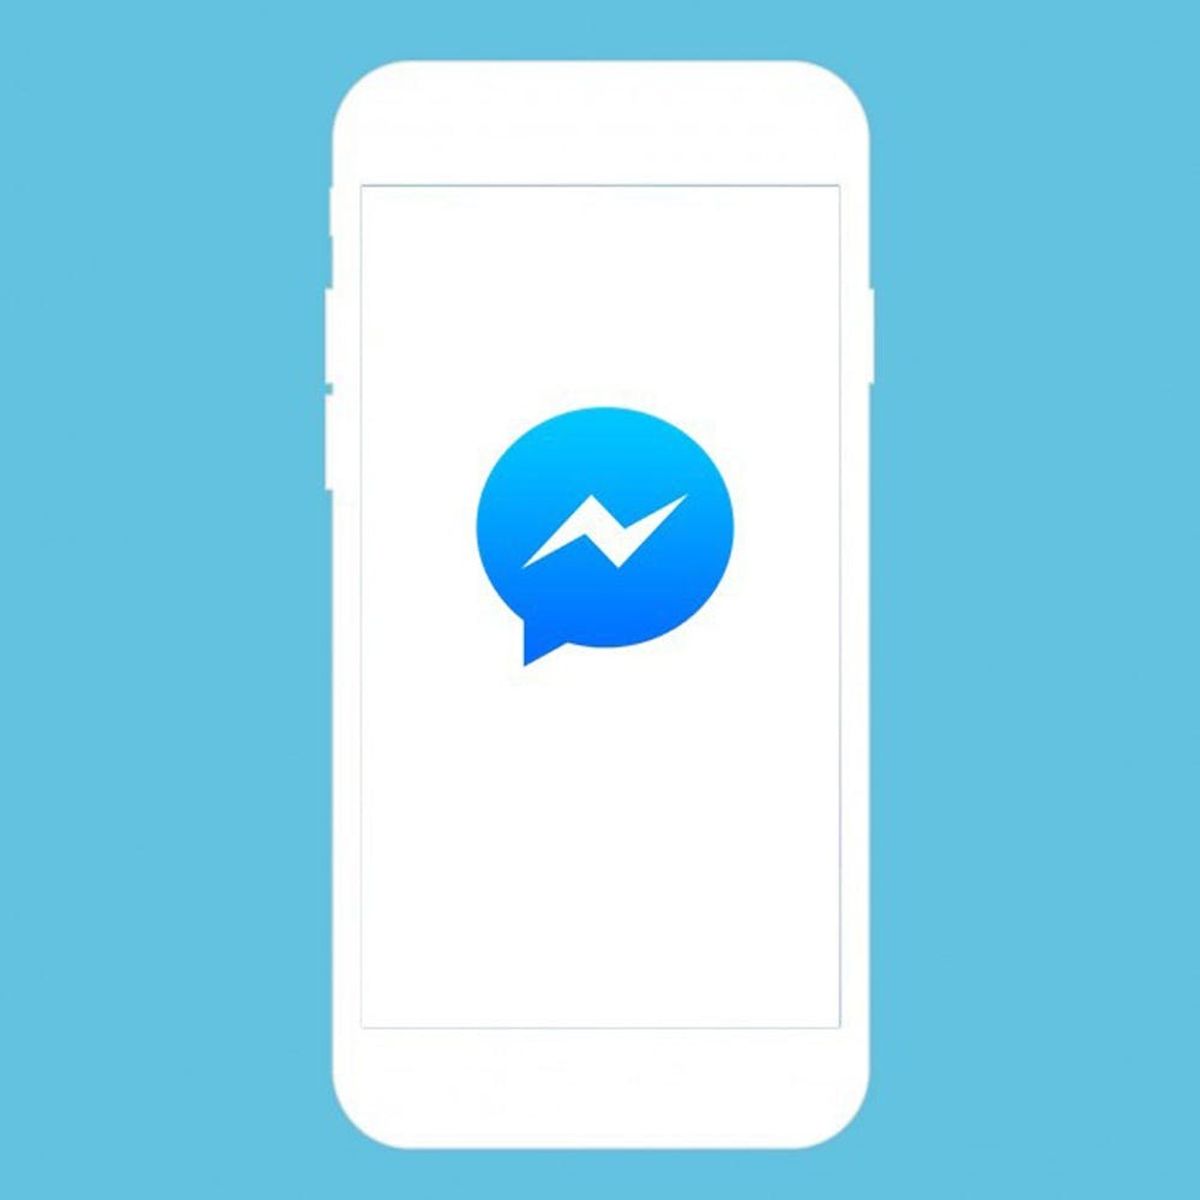 You Now Have to Download Facebook Messenger If You Want to Keep Chatting